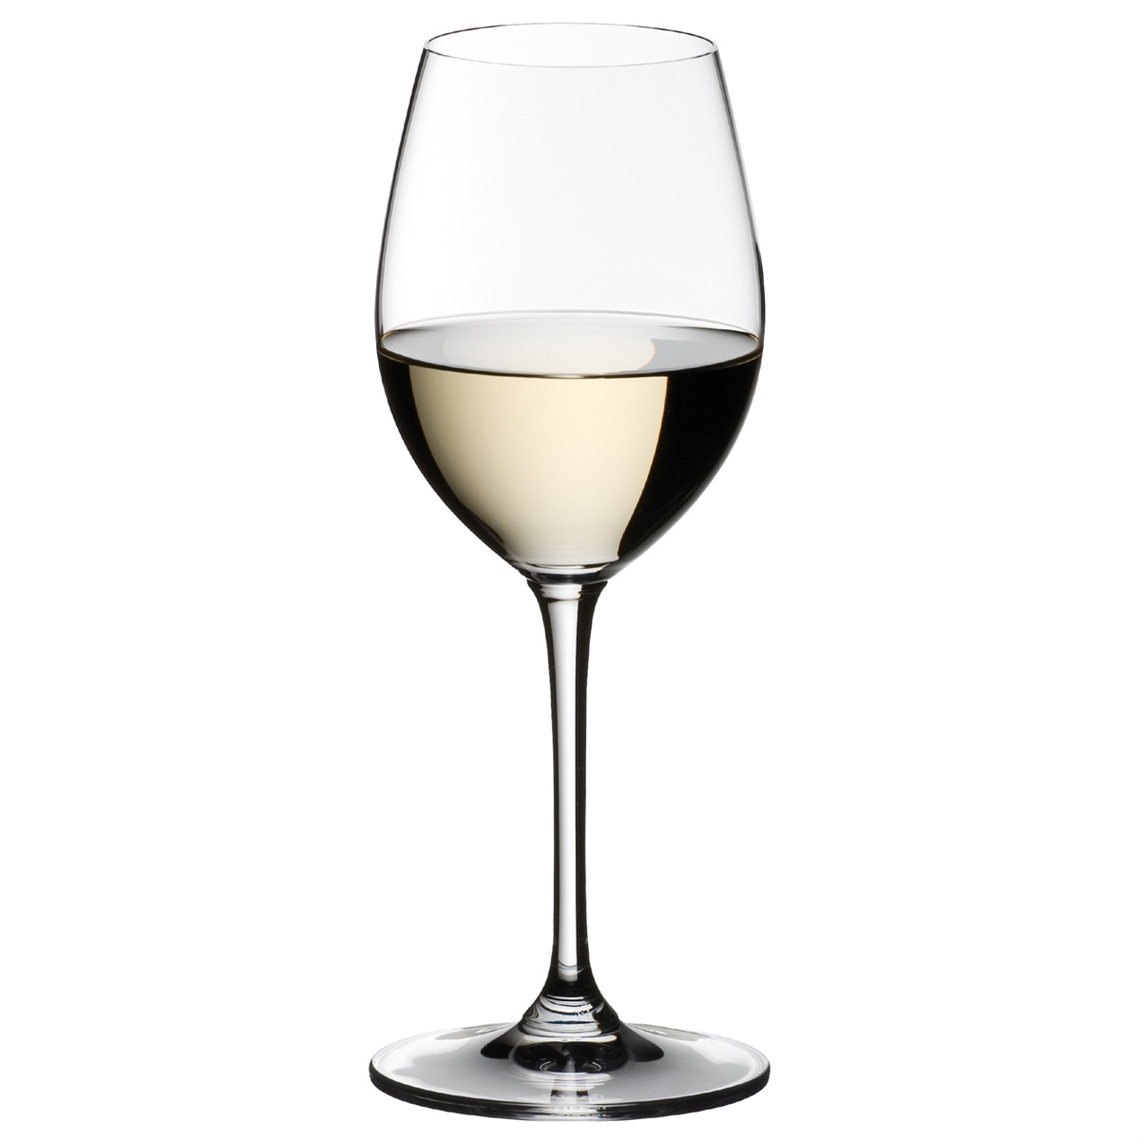 View more cocktail glasses from our Dessert Wine Glasses range